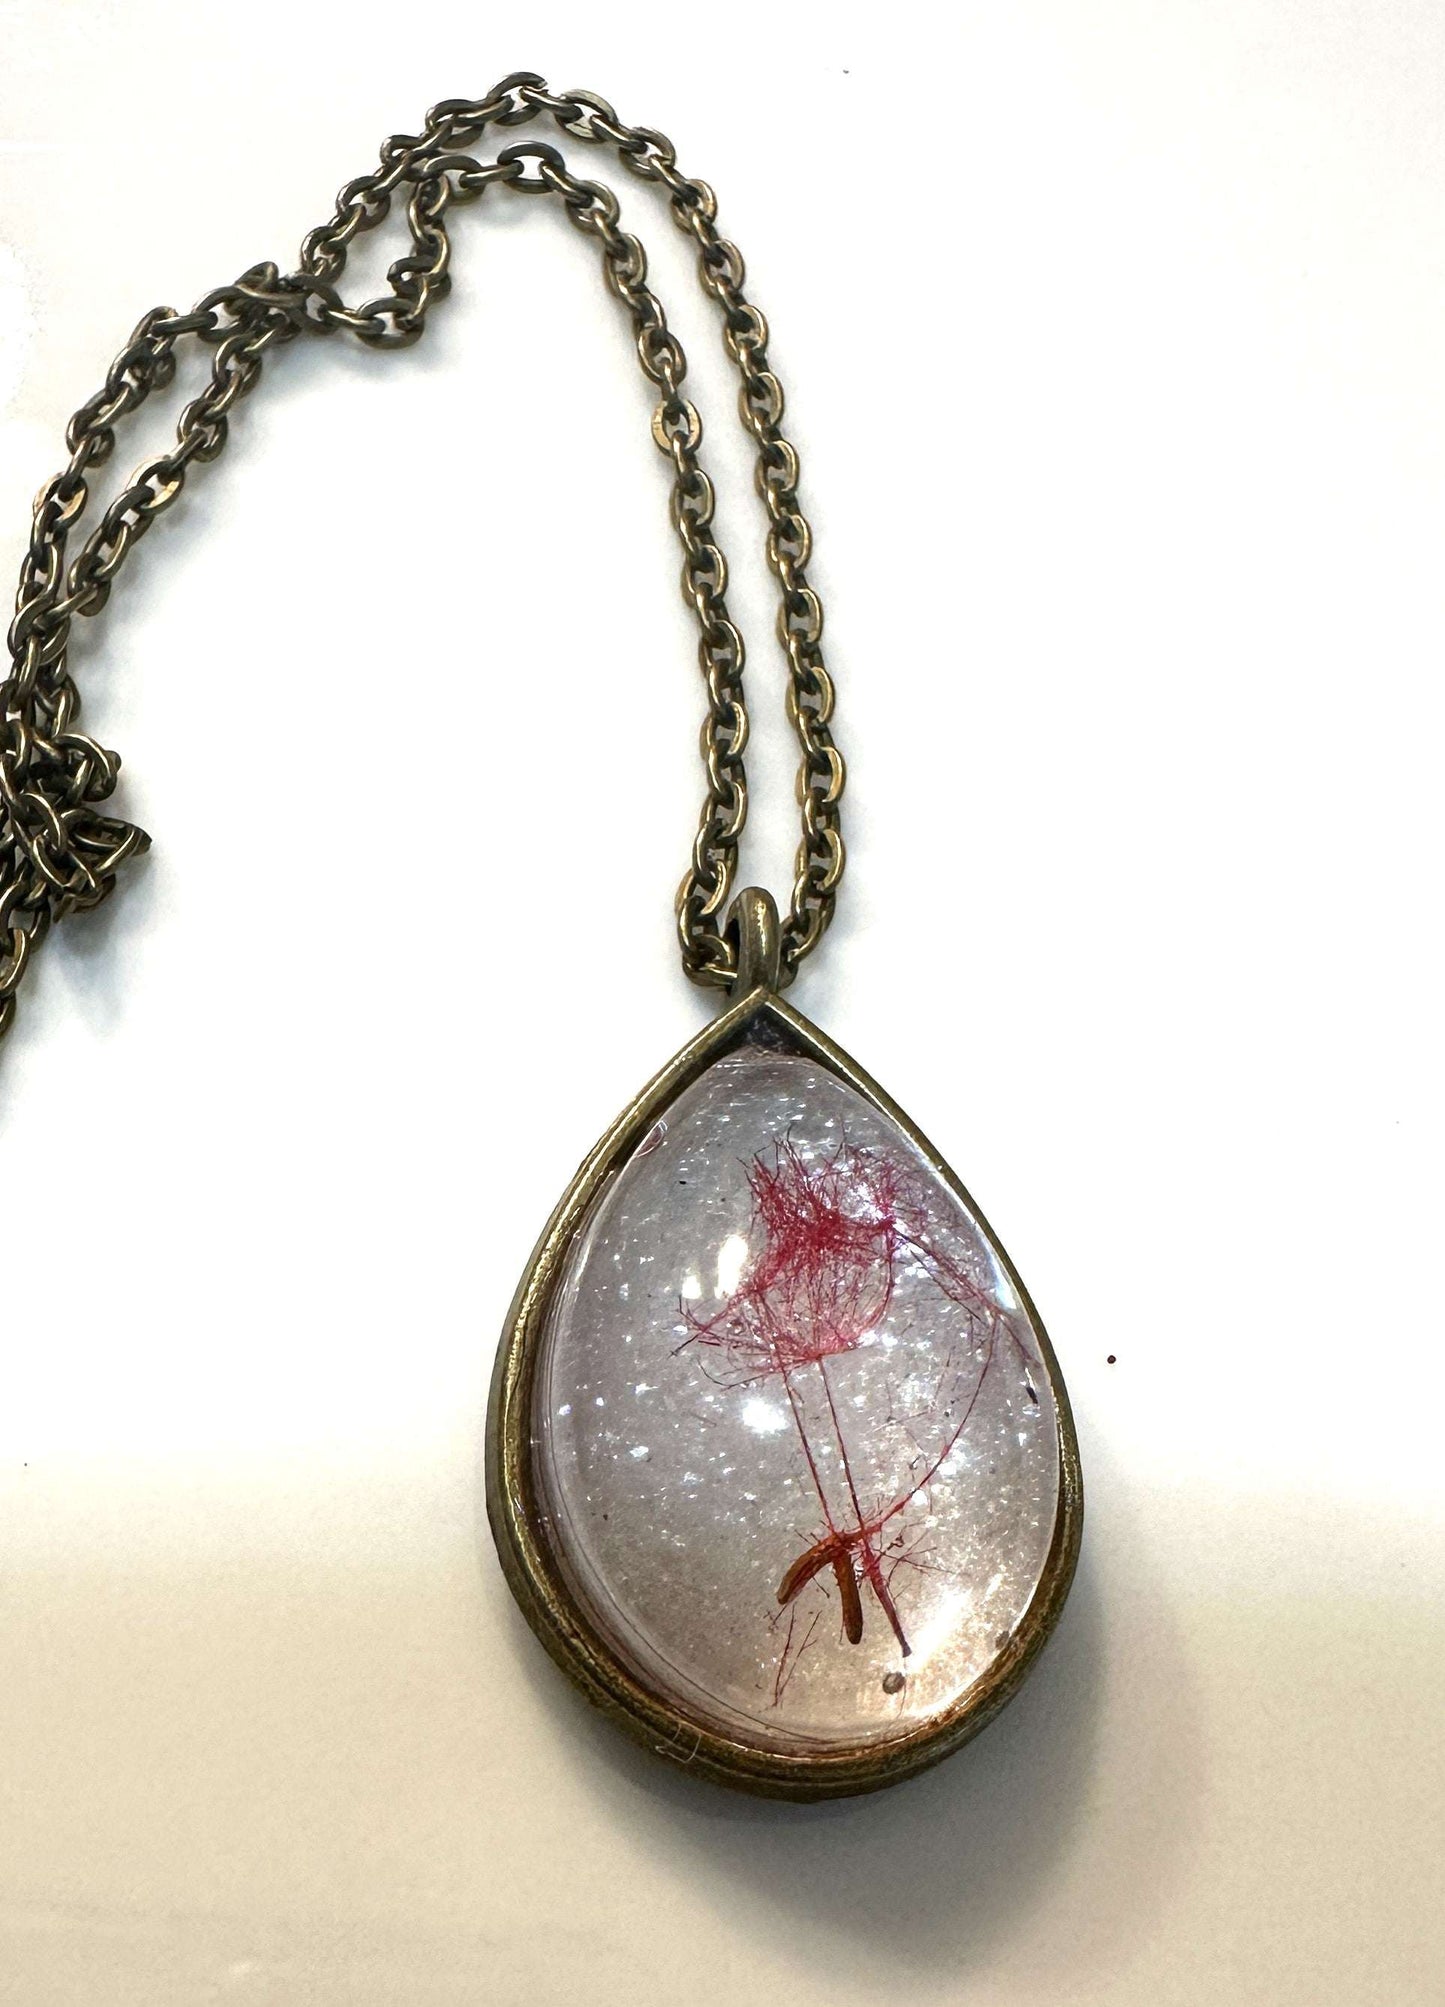 Three Wishes Fairy Pendant  - Handmade with real Dandelion Seeds